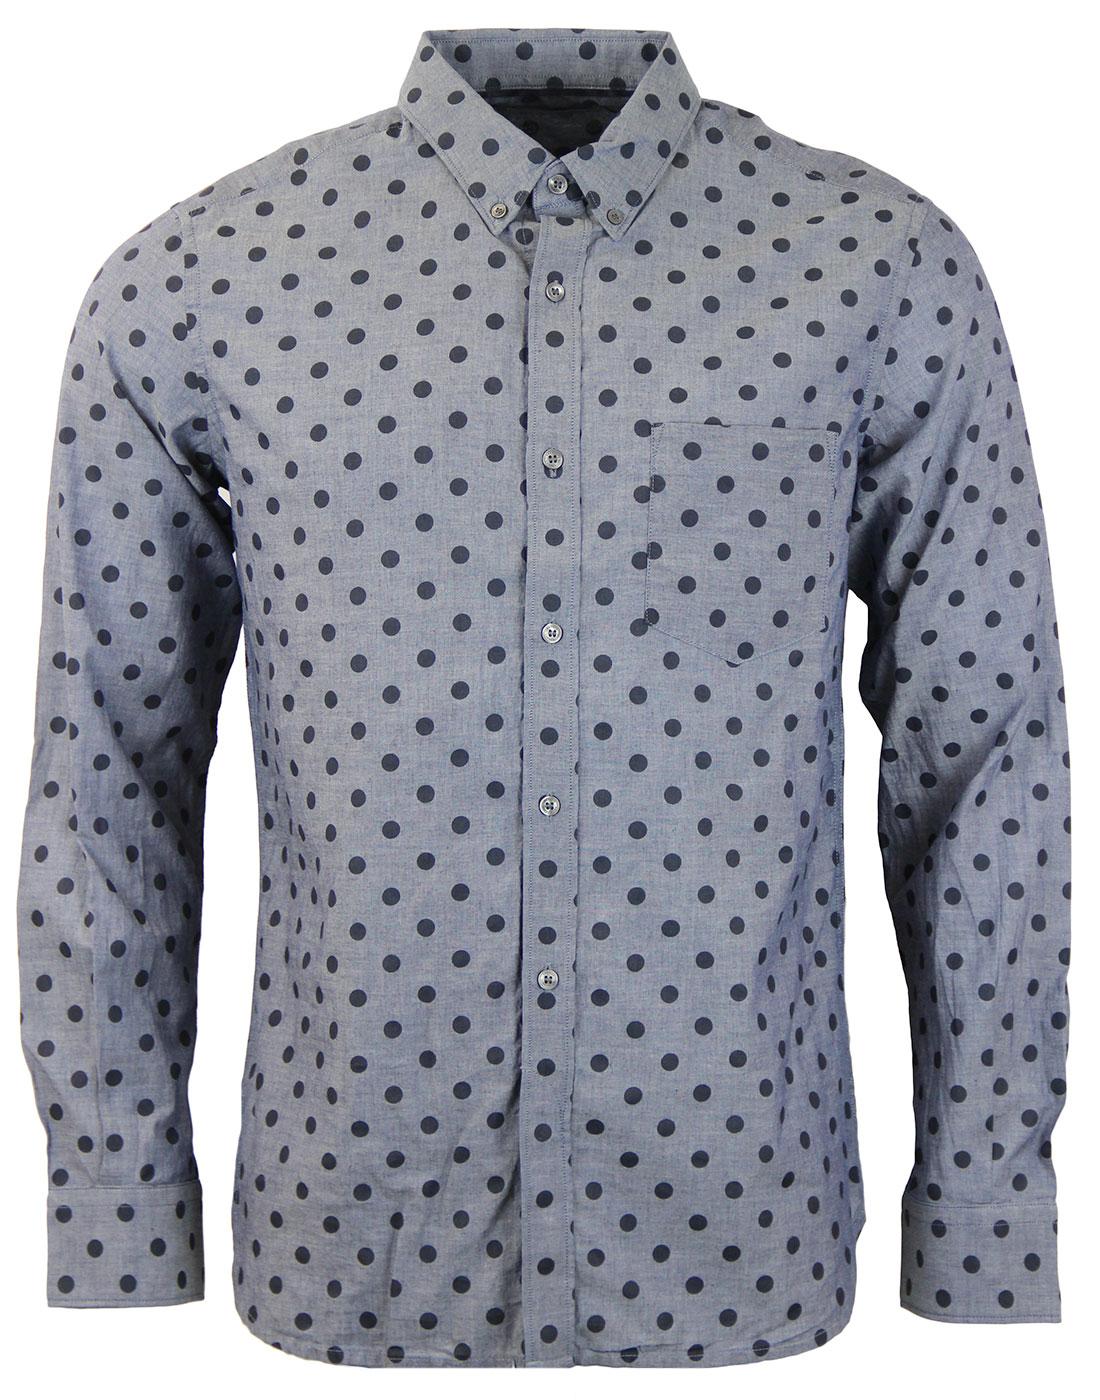 FRENCH CONNECTION Retro 60s Mod Super Light Spot Shirt in Navy